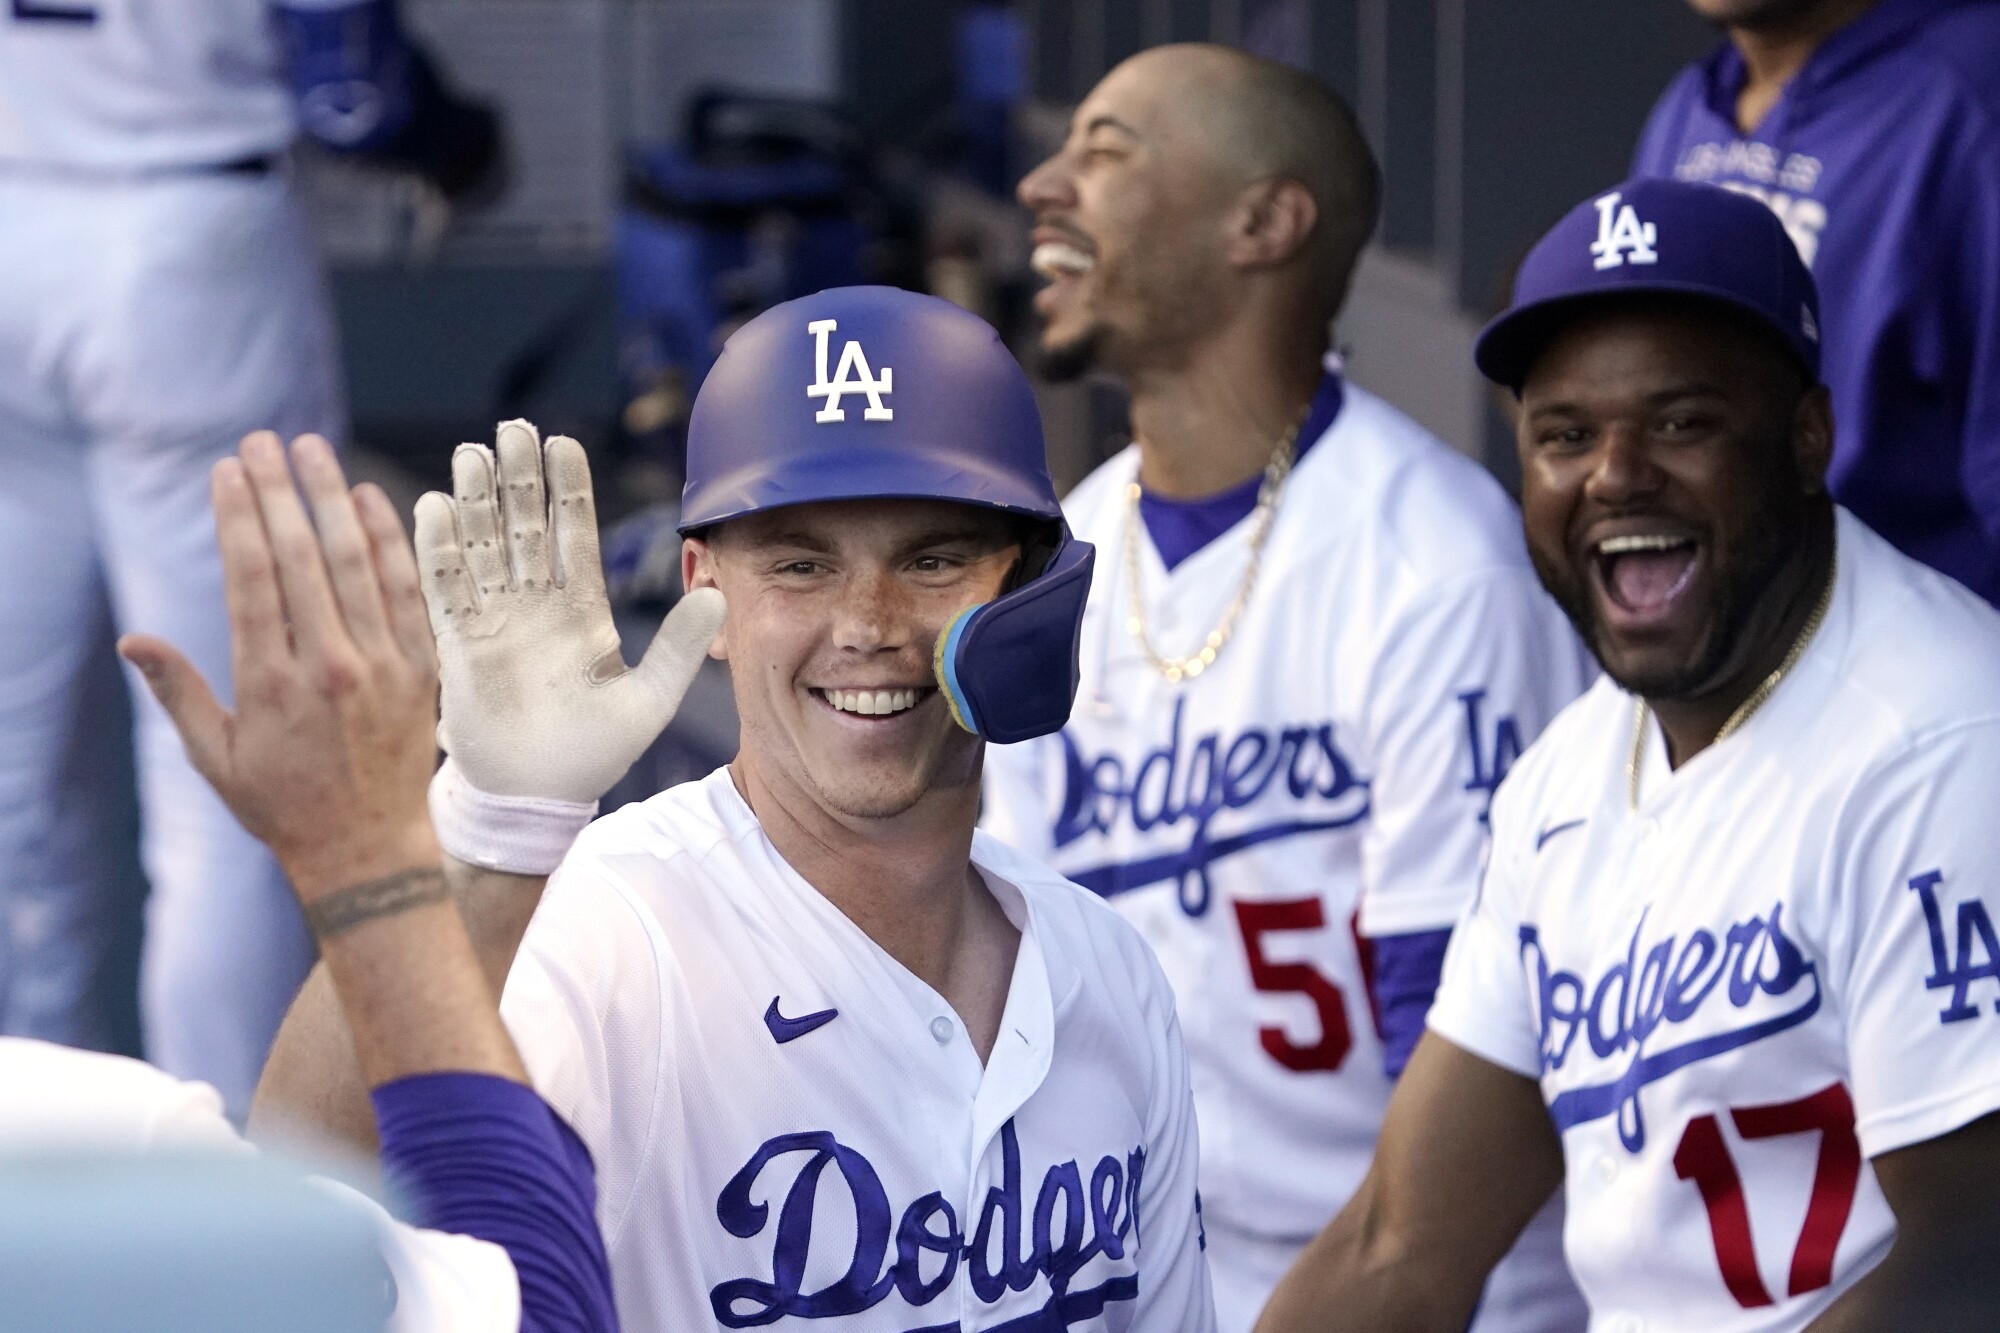 Dodgers catcher Will Smith is congratulated by teammates in the dugout after hitting a solo home run.